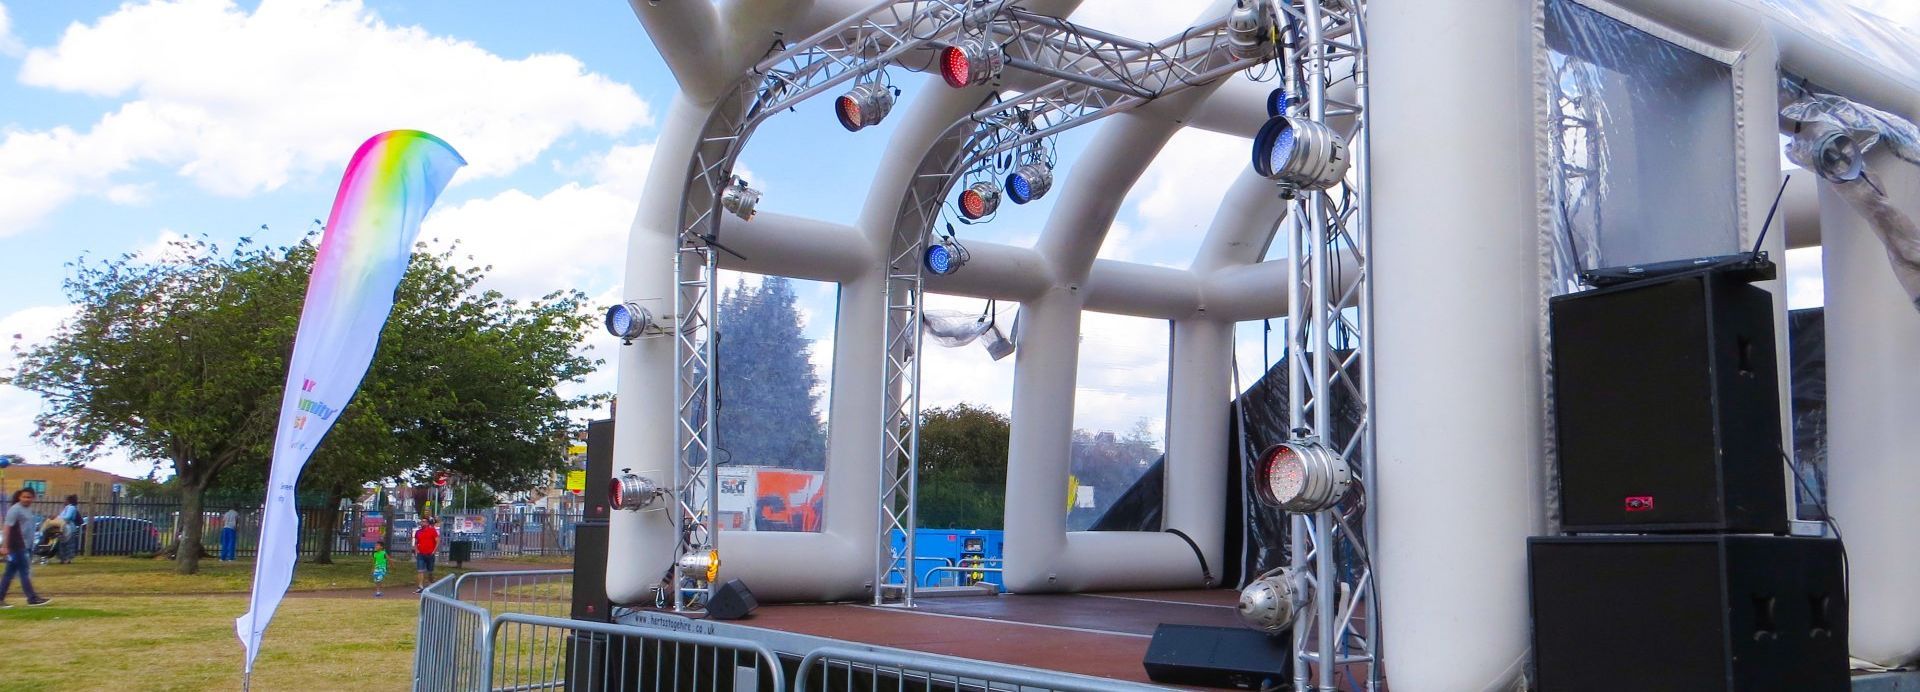 An inflatable stage in a field set up for an event with a multi coloured flag in front and crowd barriers.